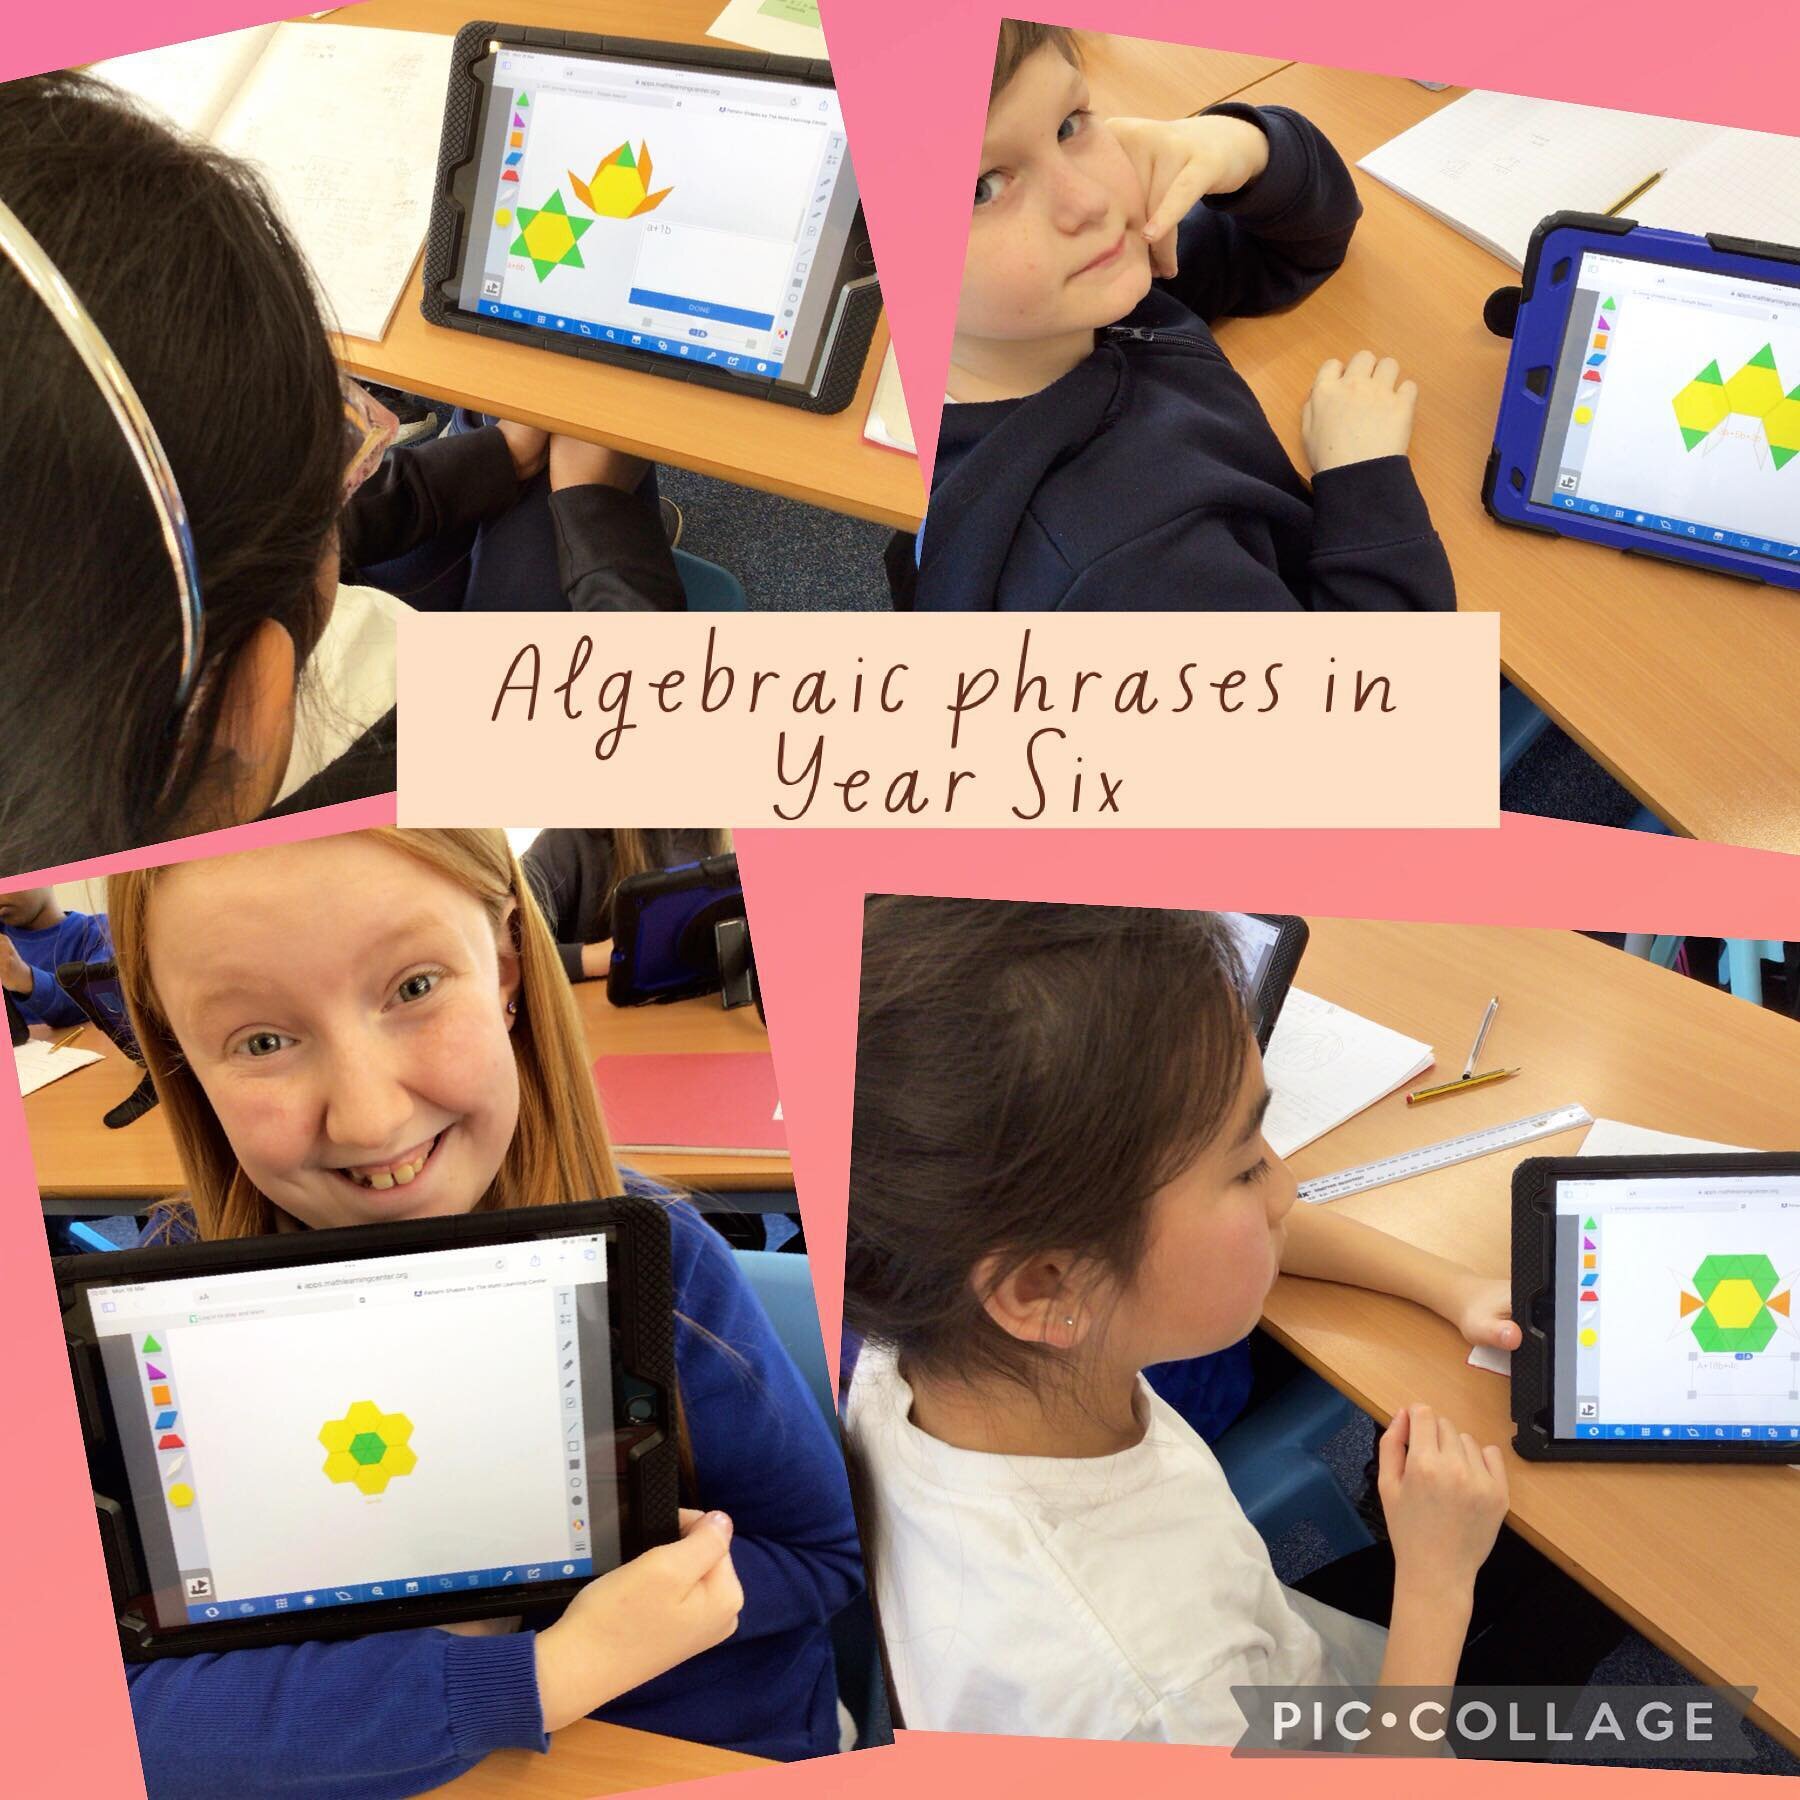 Using pattern shapes to create algebraic phrases.
#smaaamaths